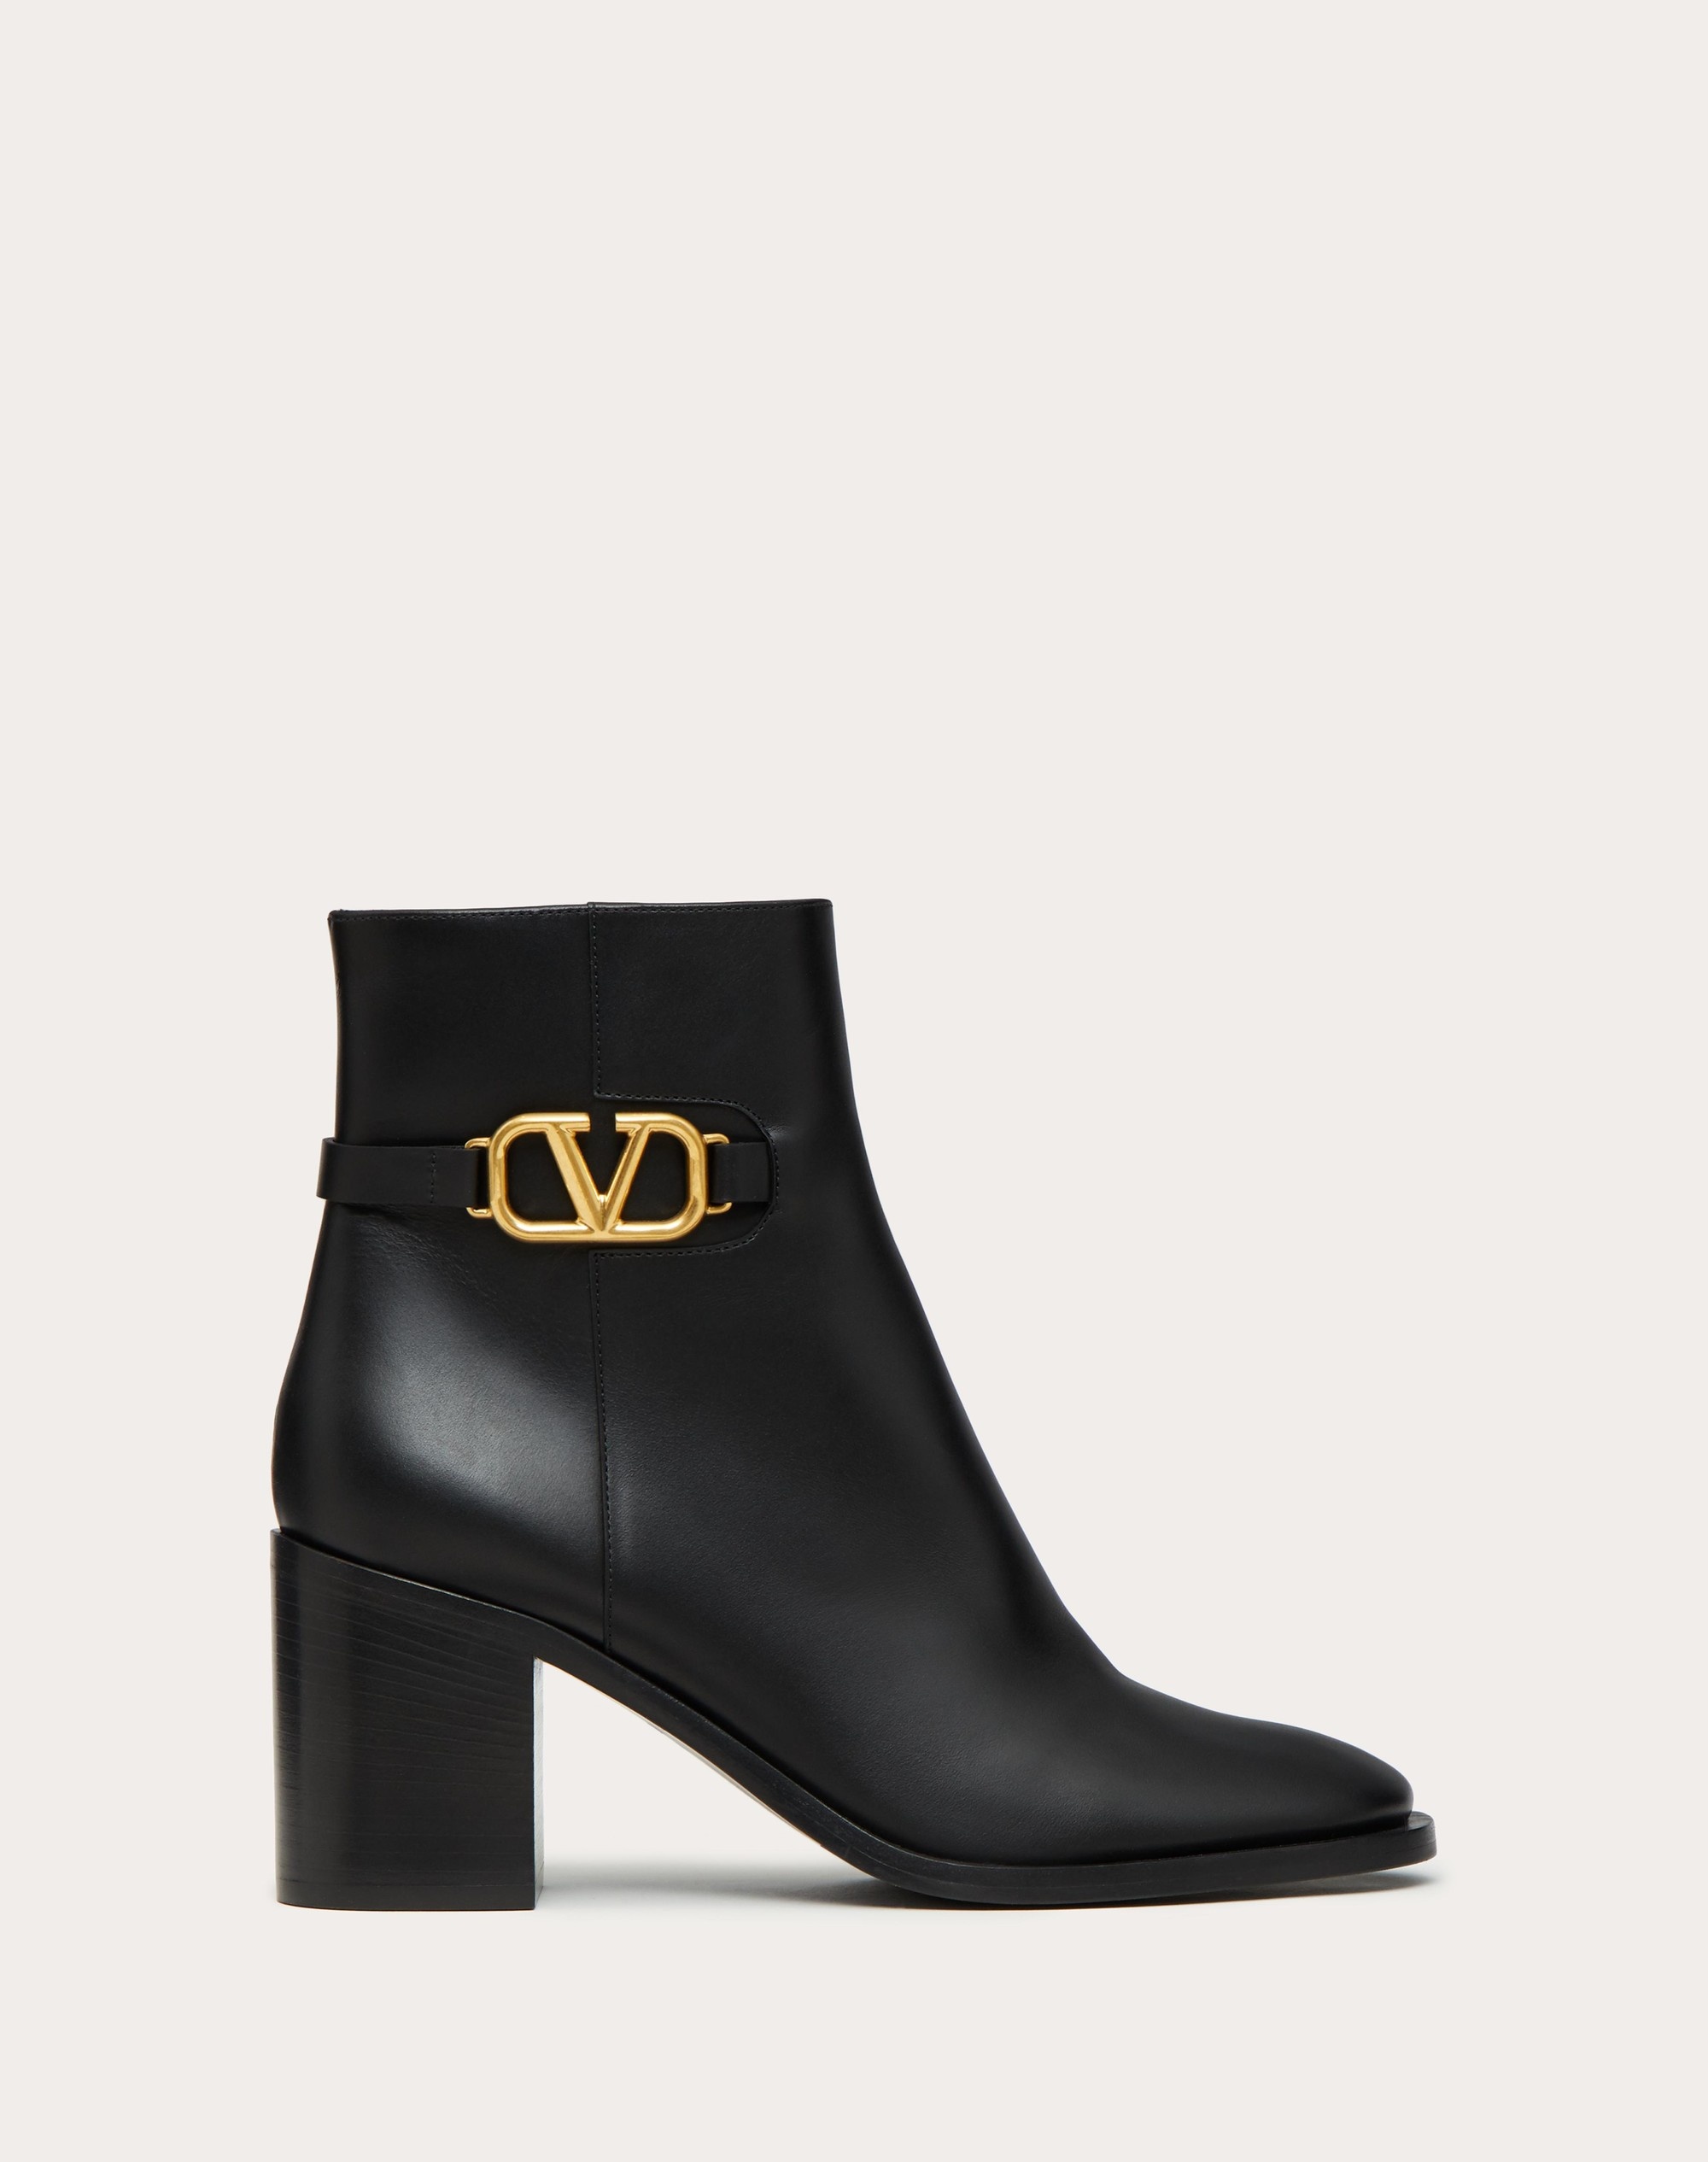 VLOGO SIGNATURE CALFSKIN ANKLE BOOT 75MM - 1